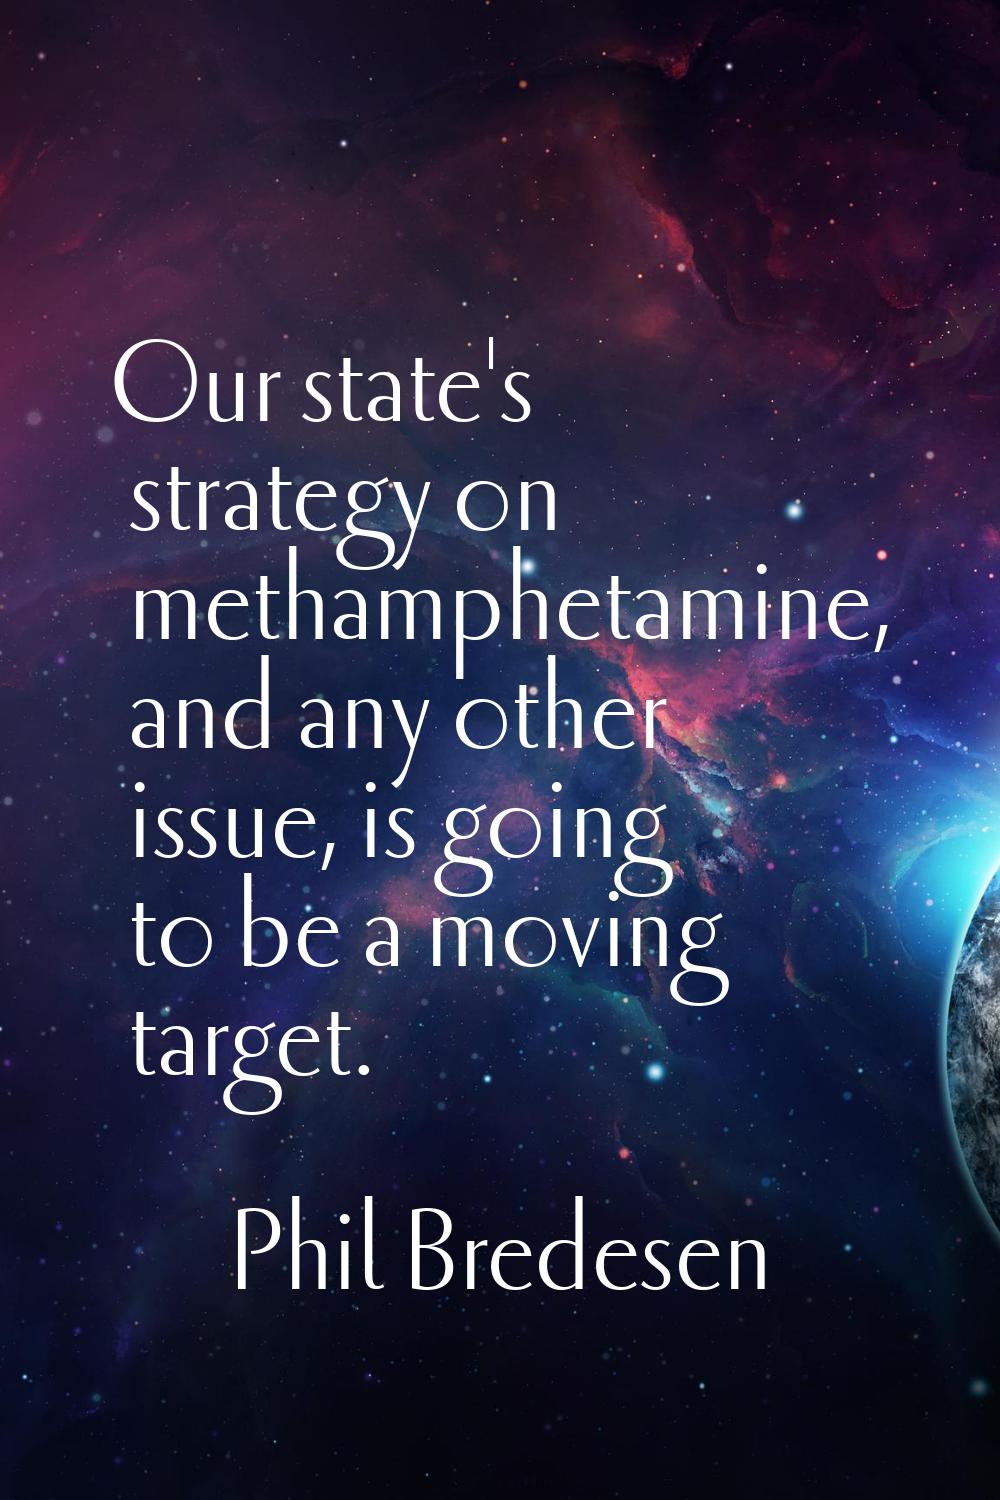 Our state's strategy on methamphetamine, and any other issue, is going to be a moving target.